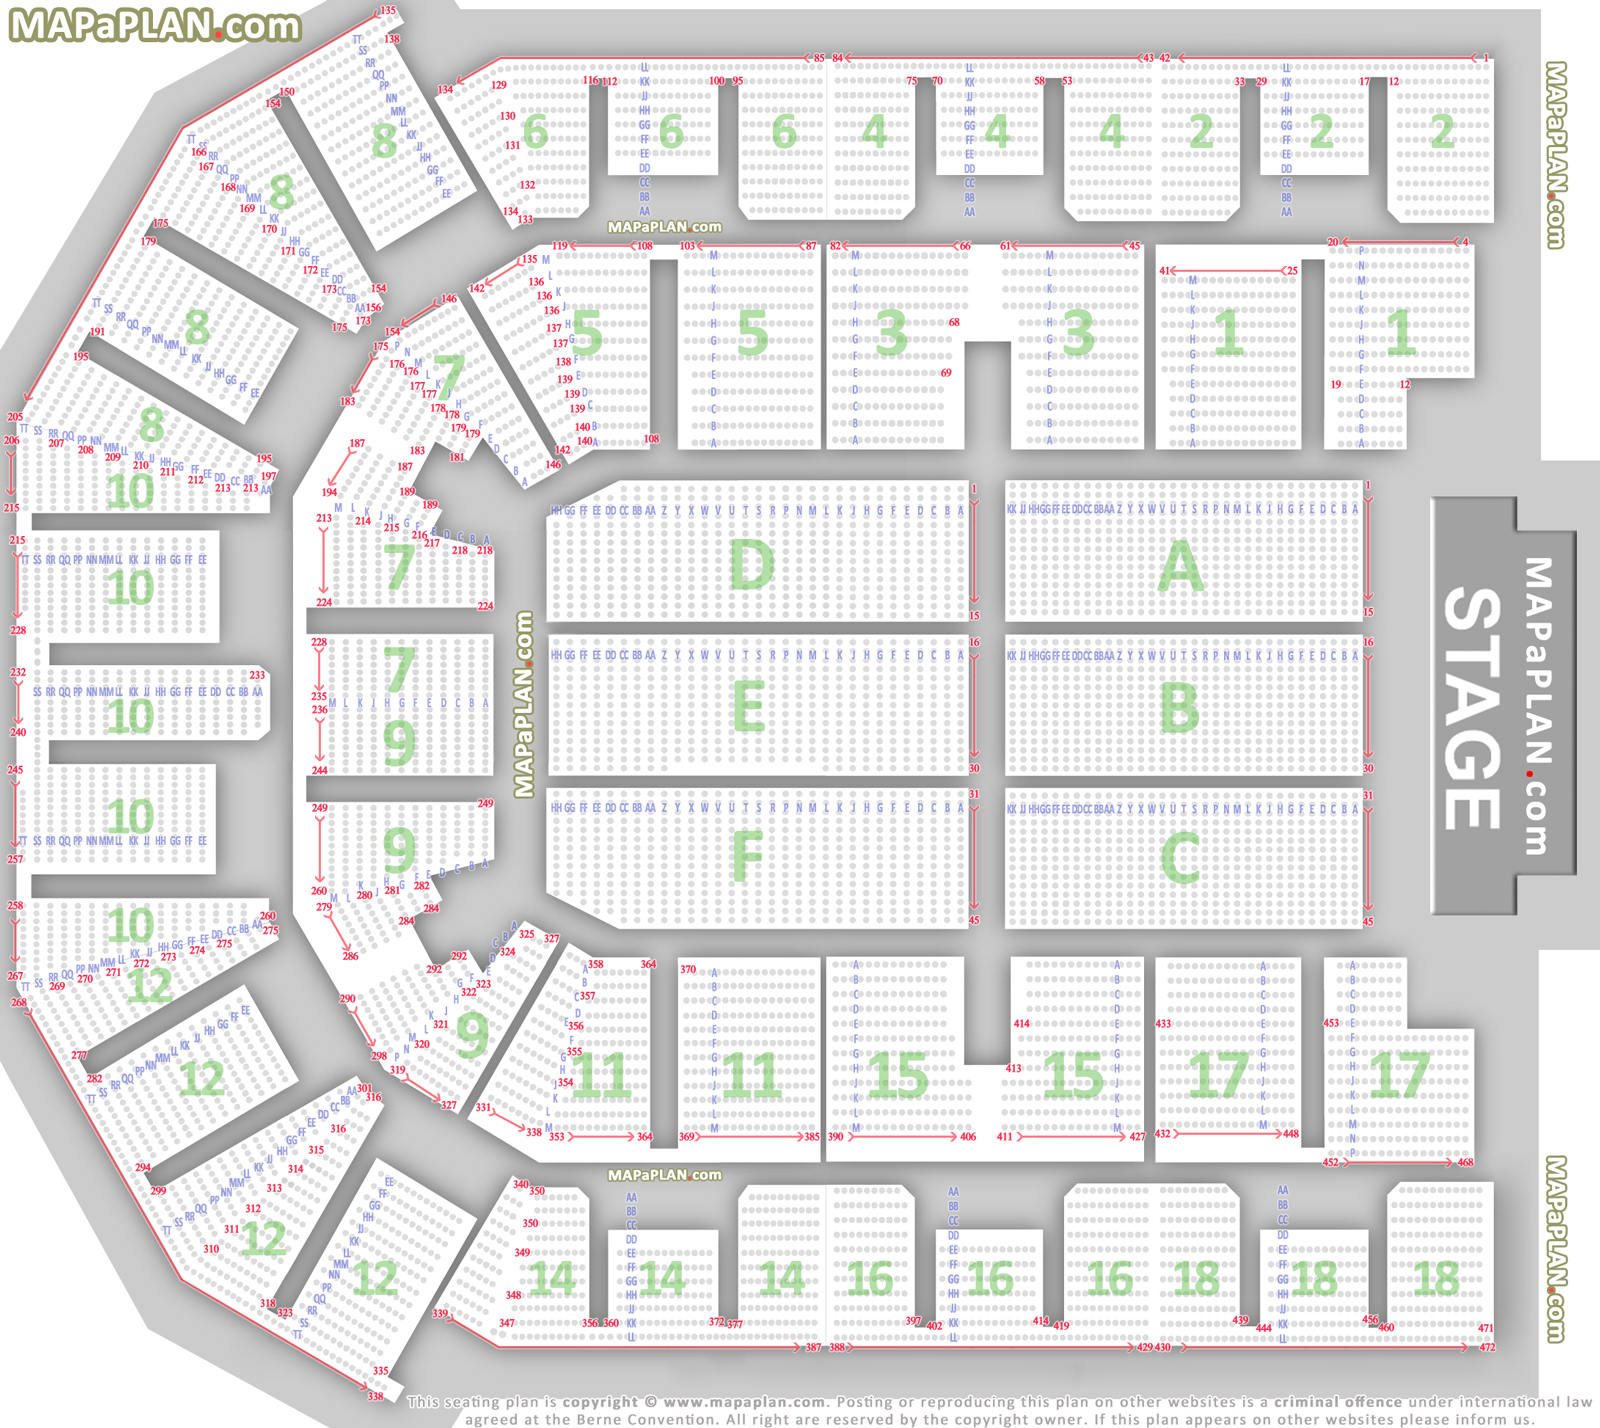 Liverpool Echo Arena Detailed seat numbers chart showing